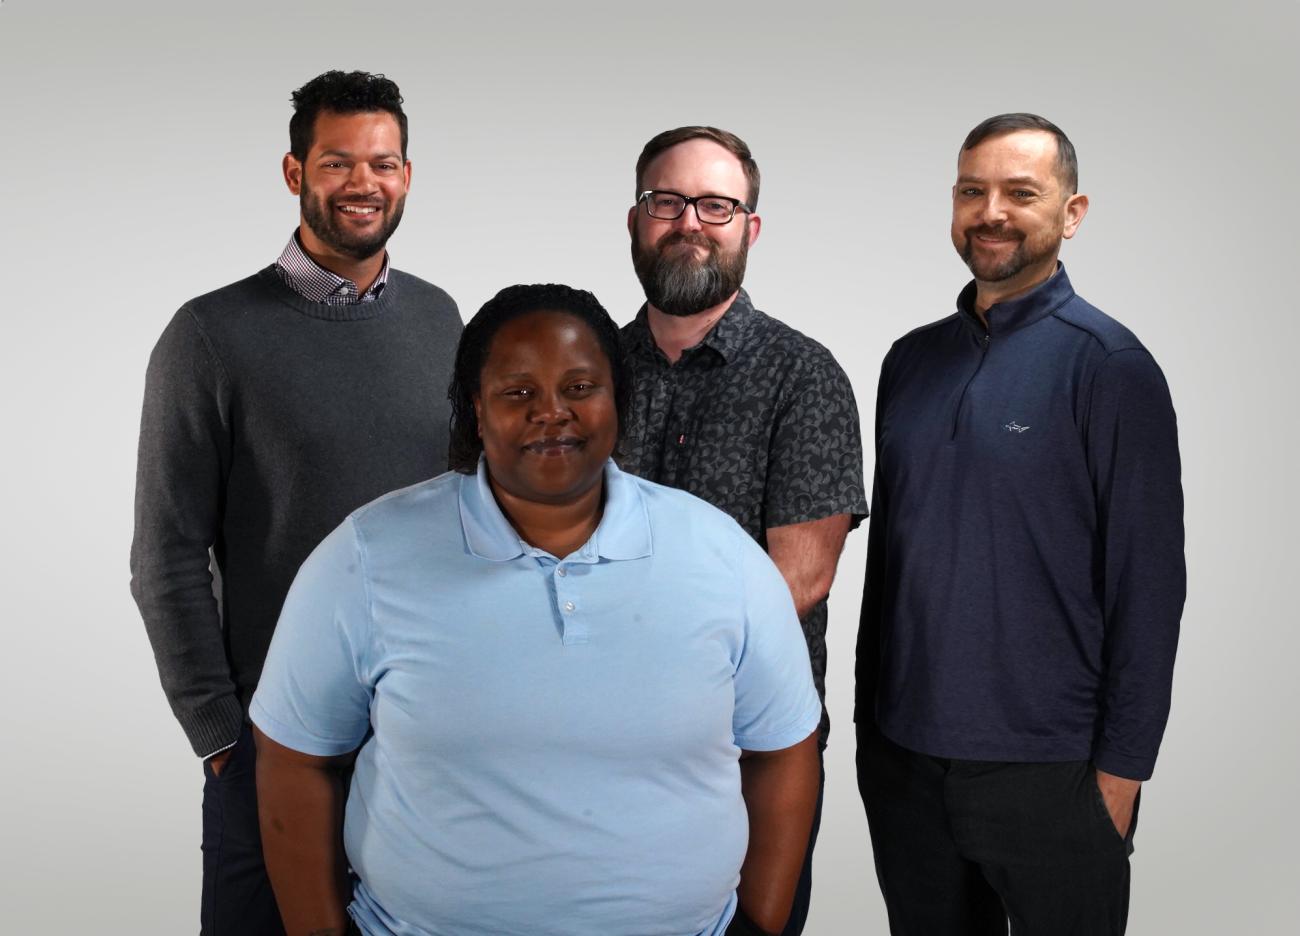 4 members of the Civil Rights and Title IX staff smile for the camera in front of a white backdrop.